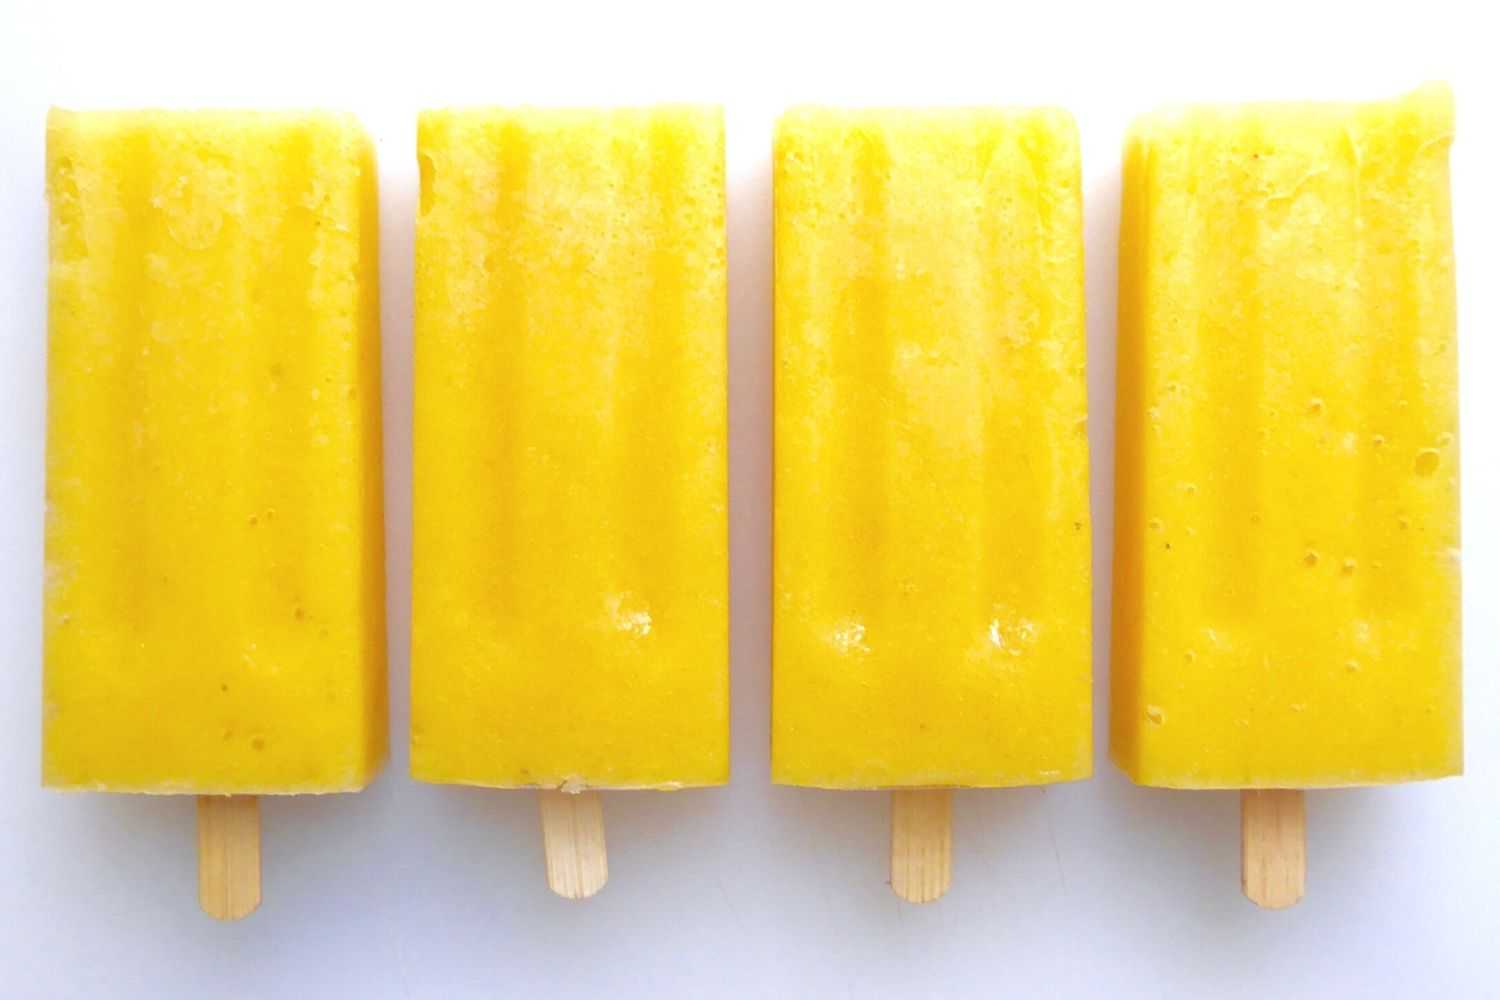 Healthy Popsicles/Ice Lollies - Tropical Fruit